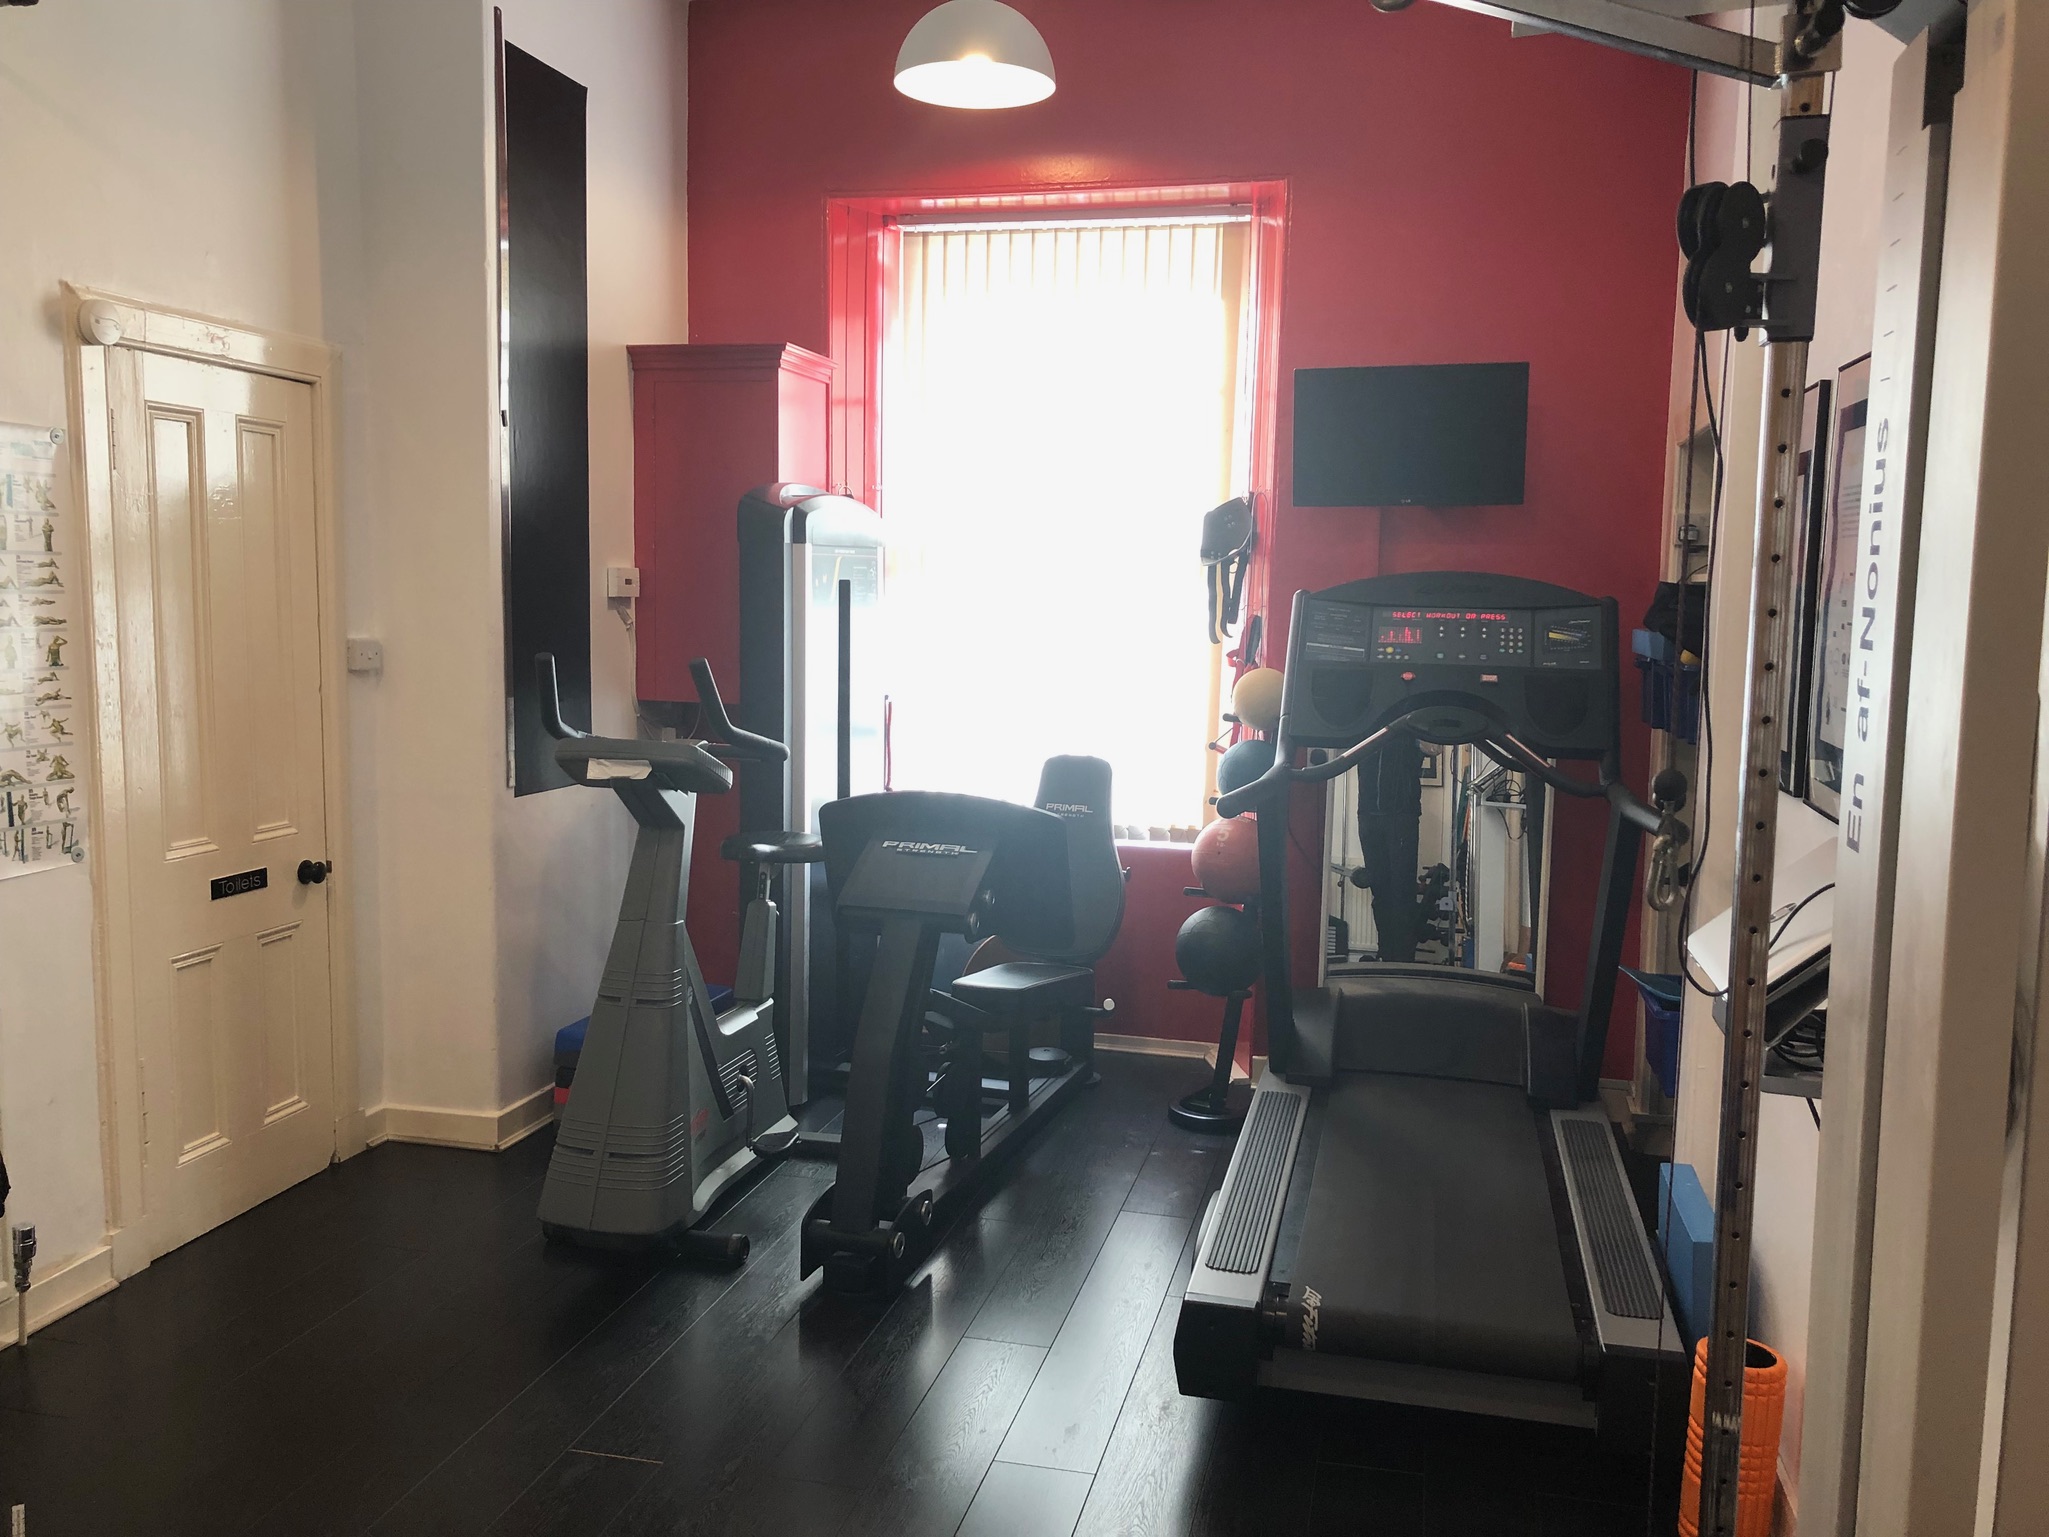 Gym equipment at Physis Physiotherapy